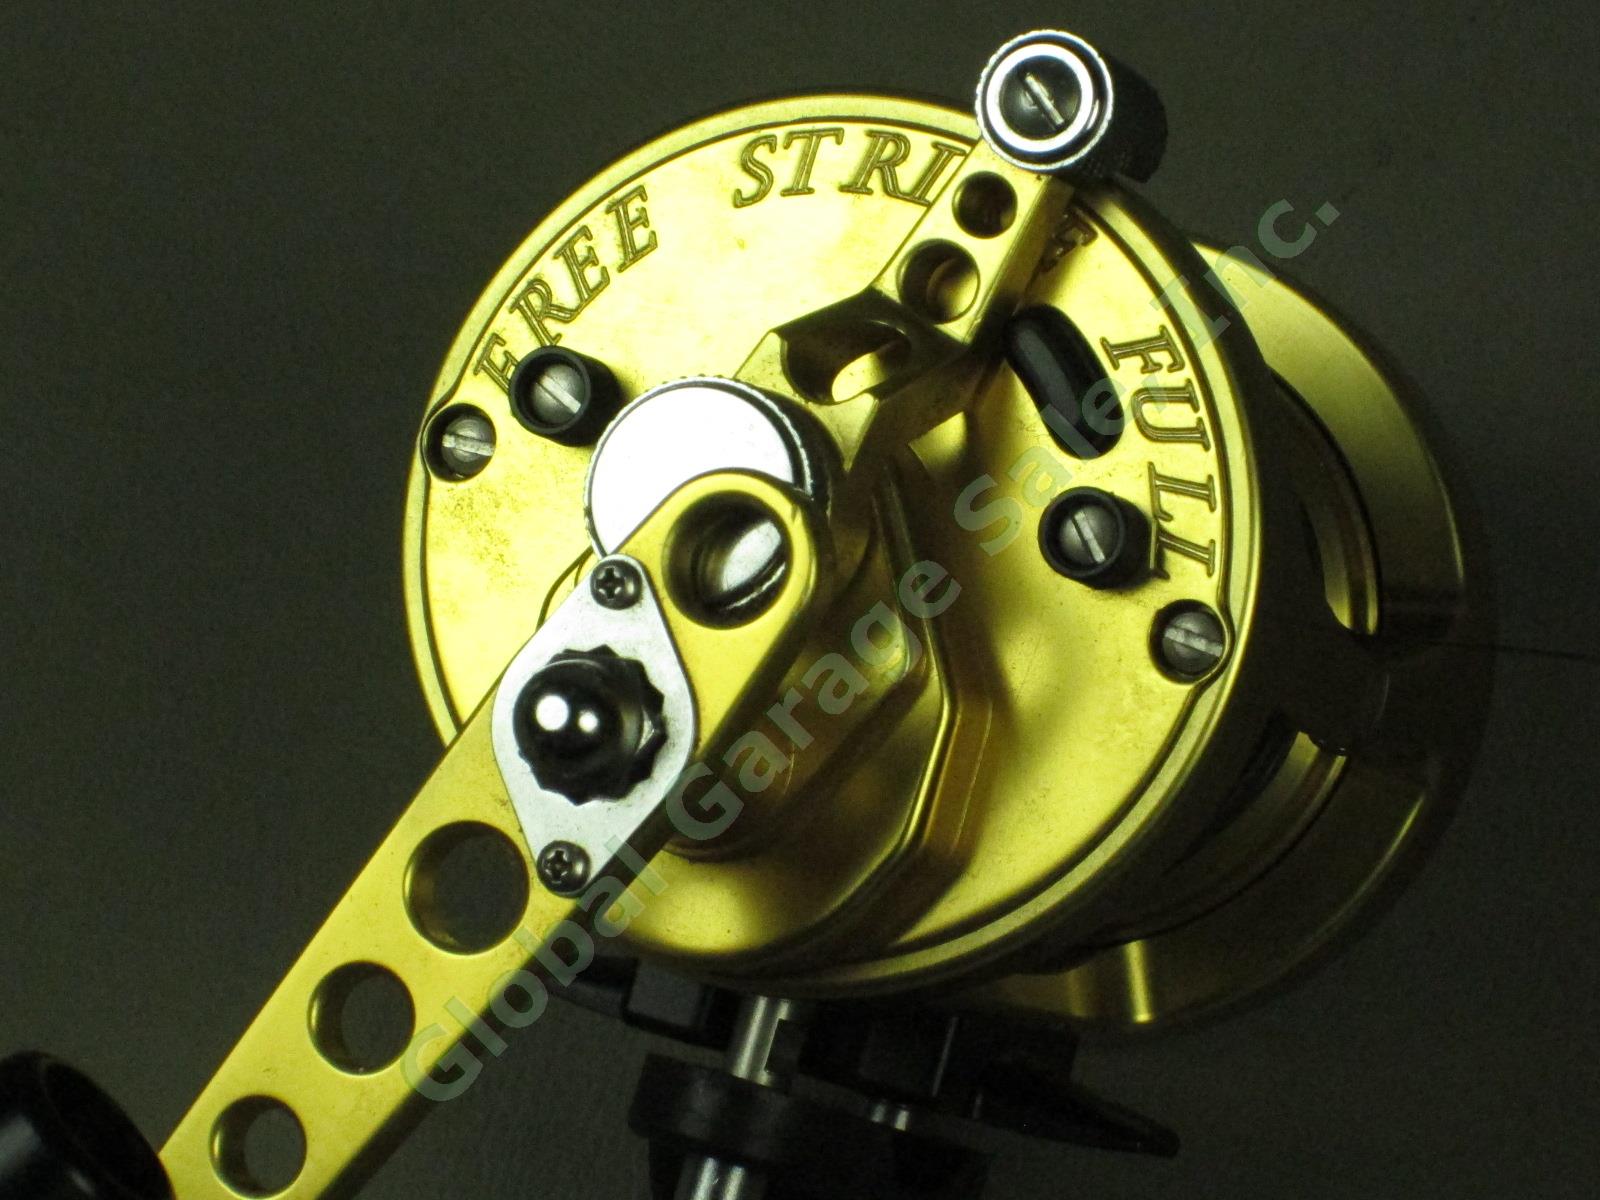 Avet LX 4.1.1 Lever Drag Gold Fishing Reel Stainless Bearings USA Made EXC+ Cond 5